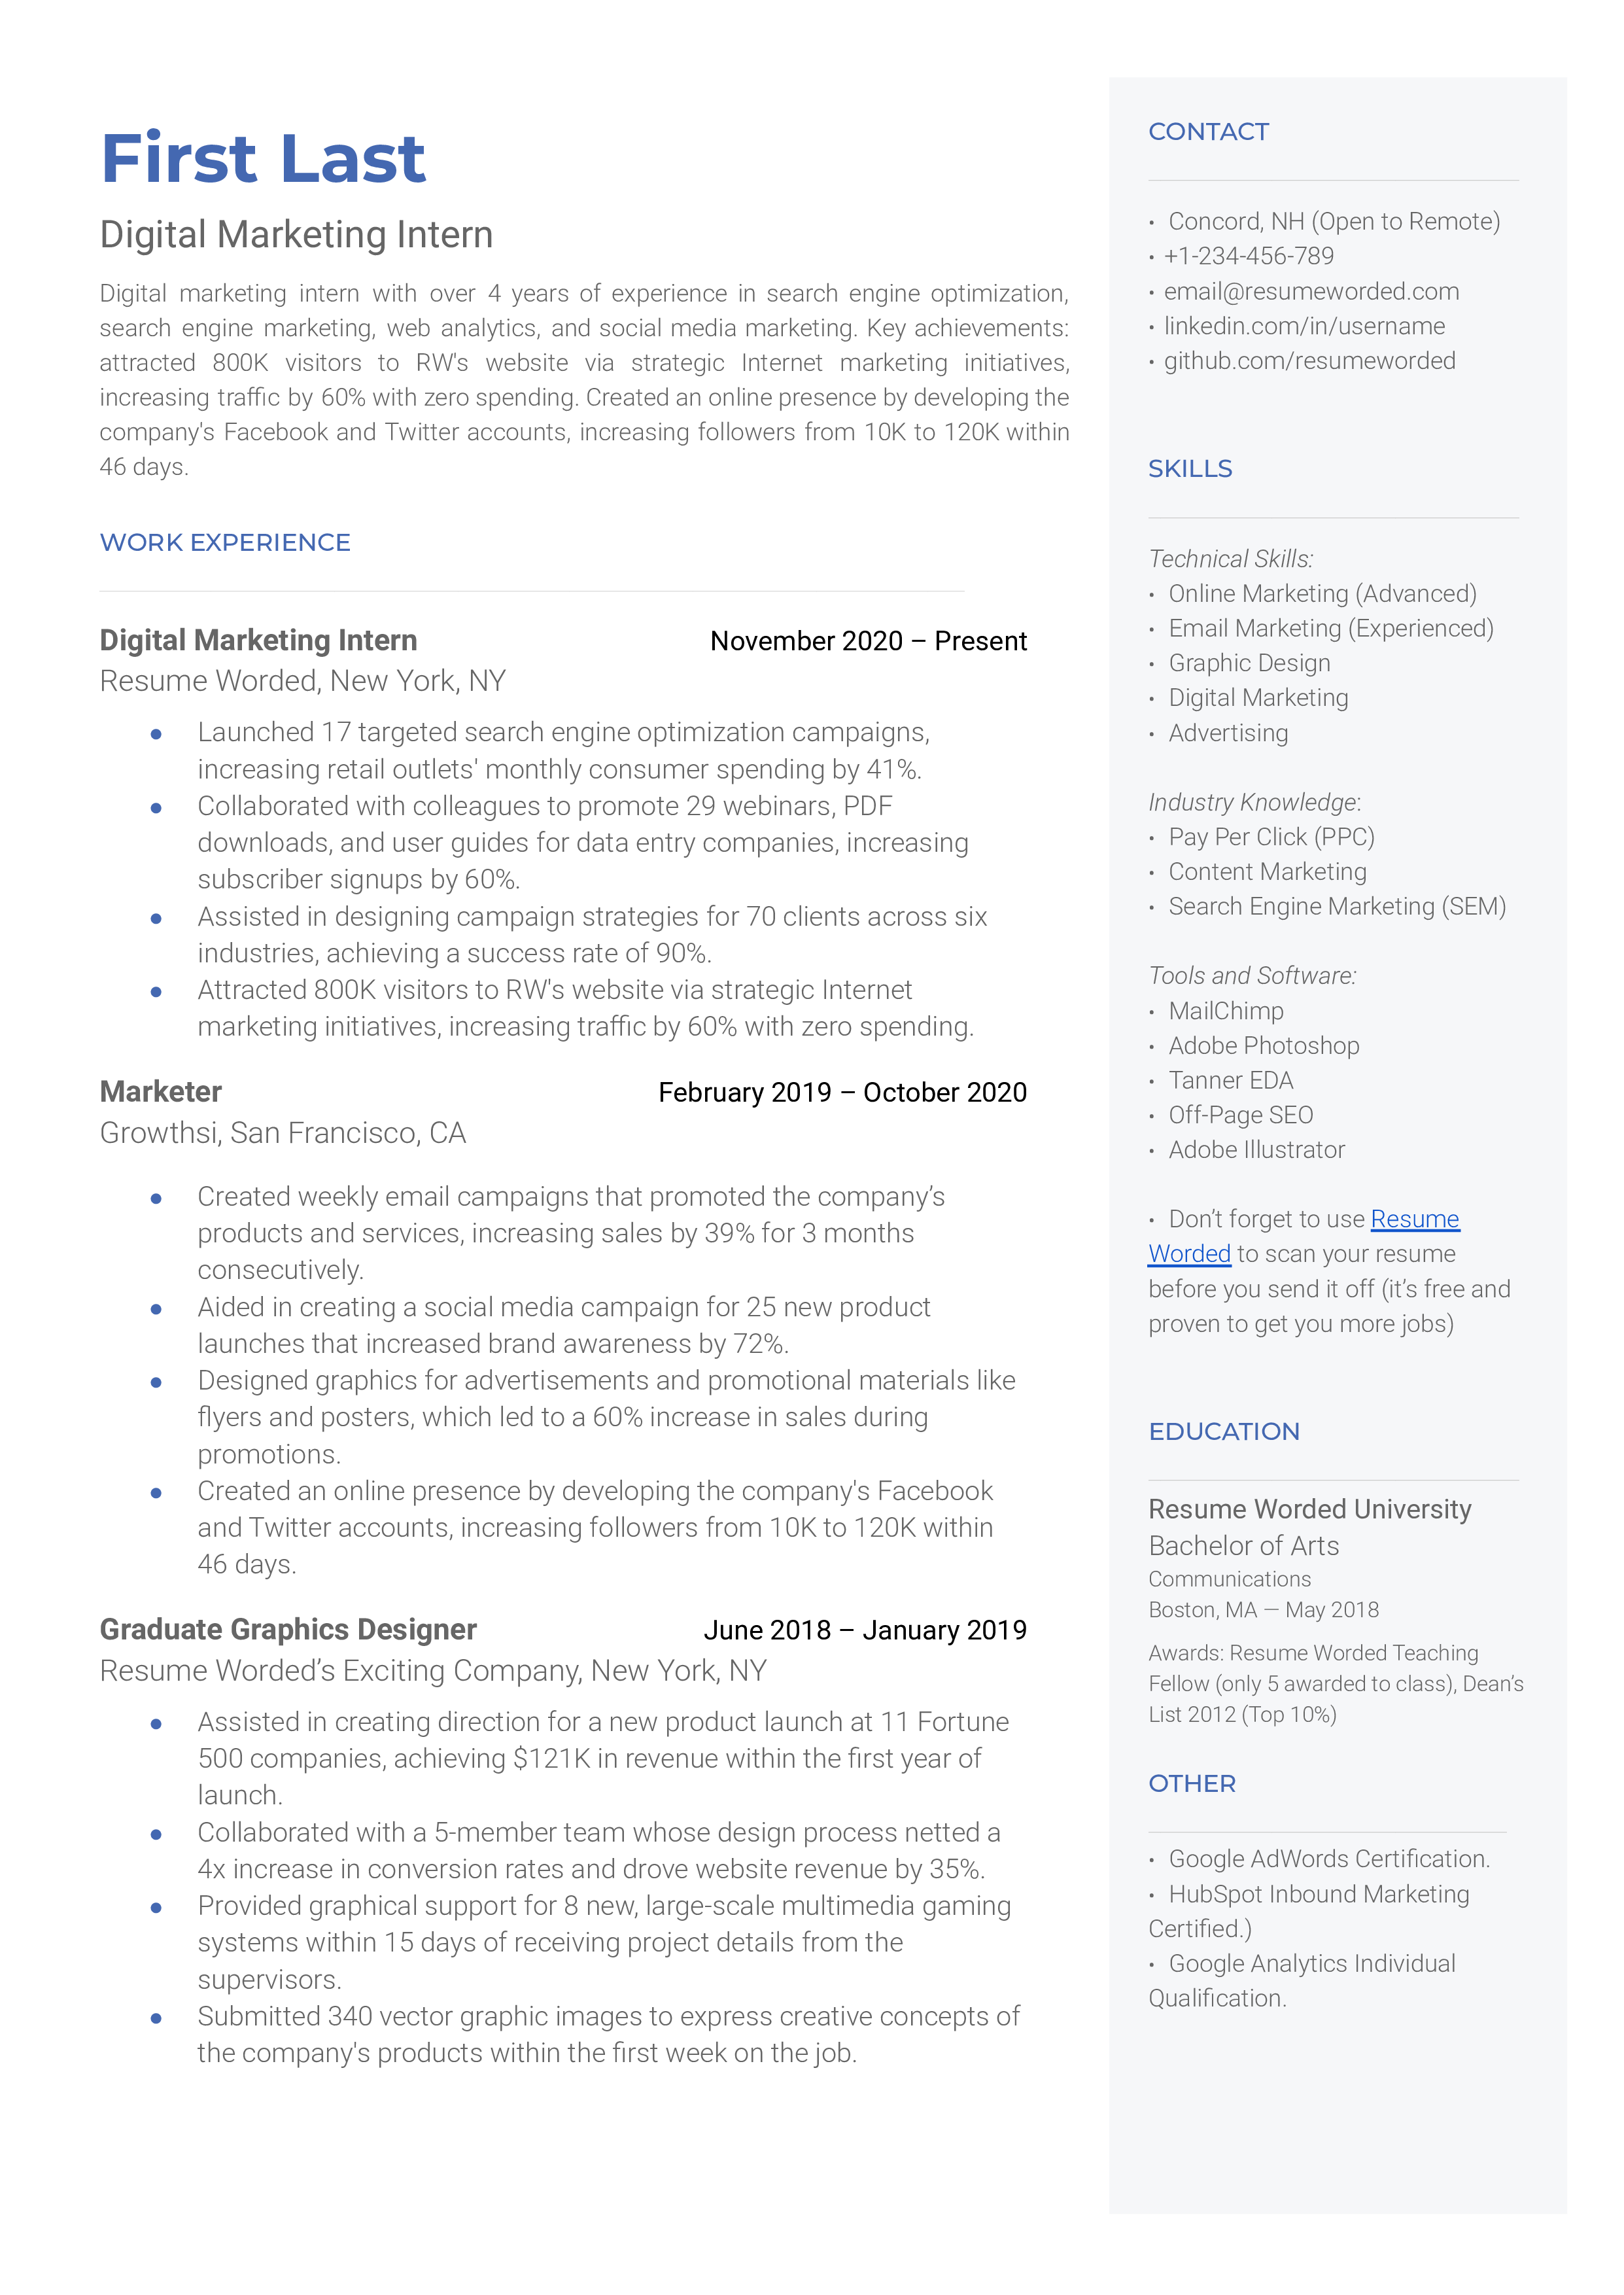 A well-structured resume for a Digital Marketing Intern role.